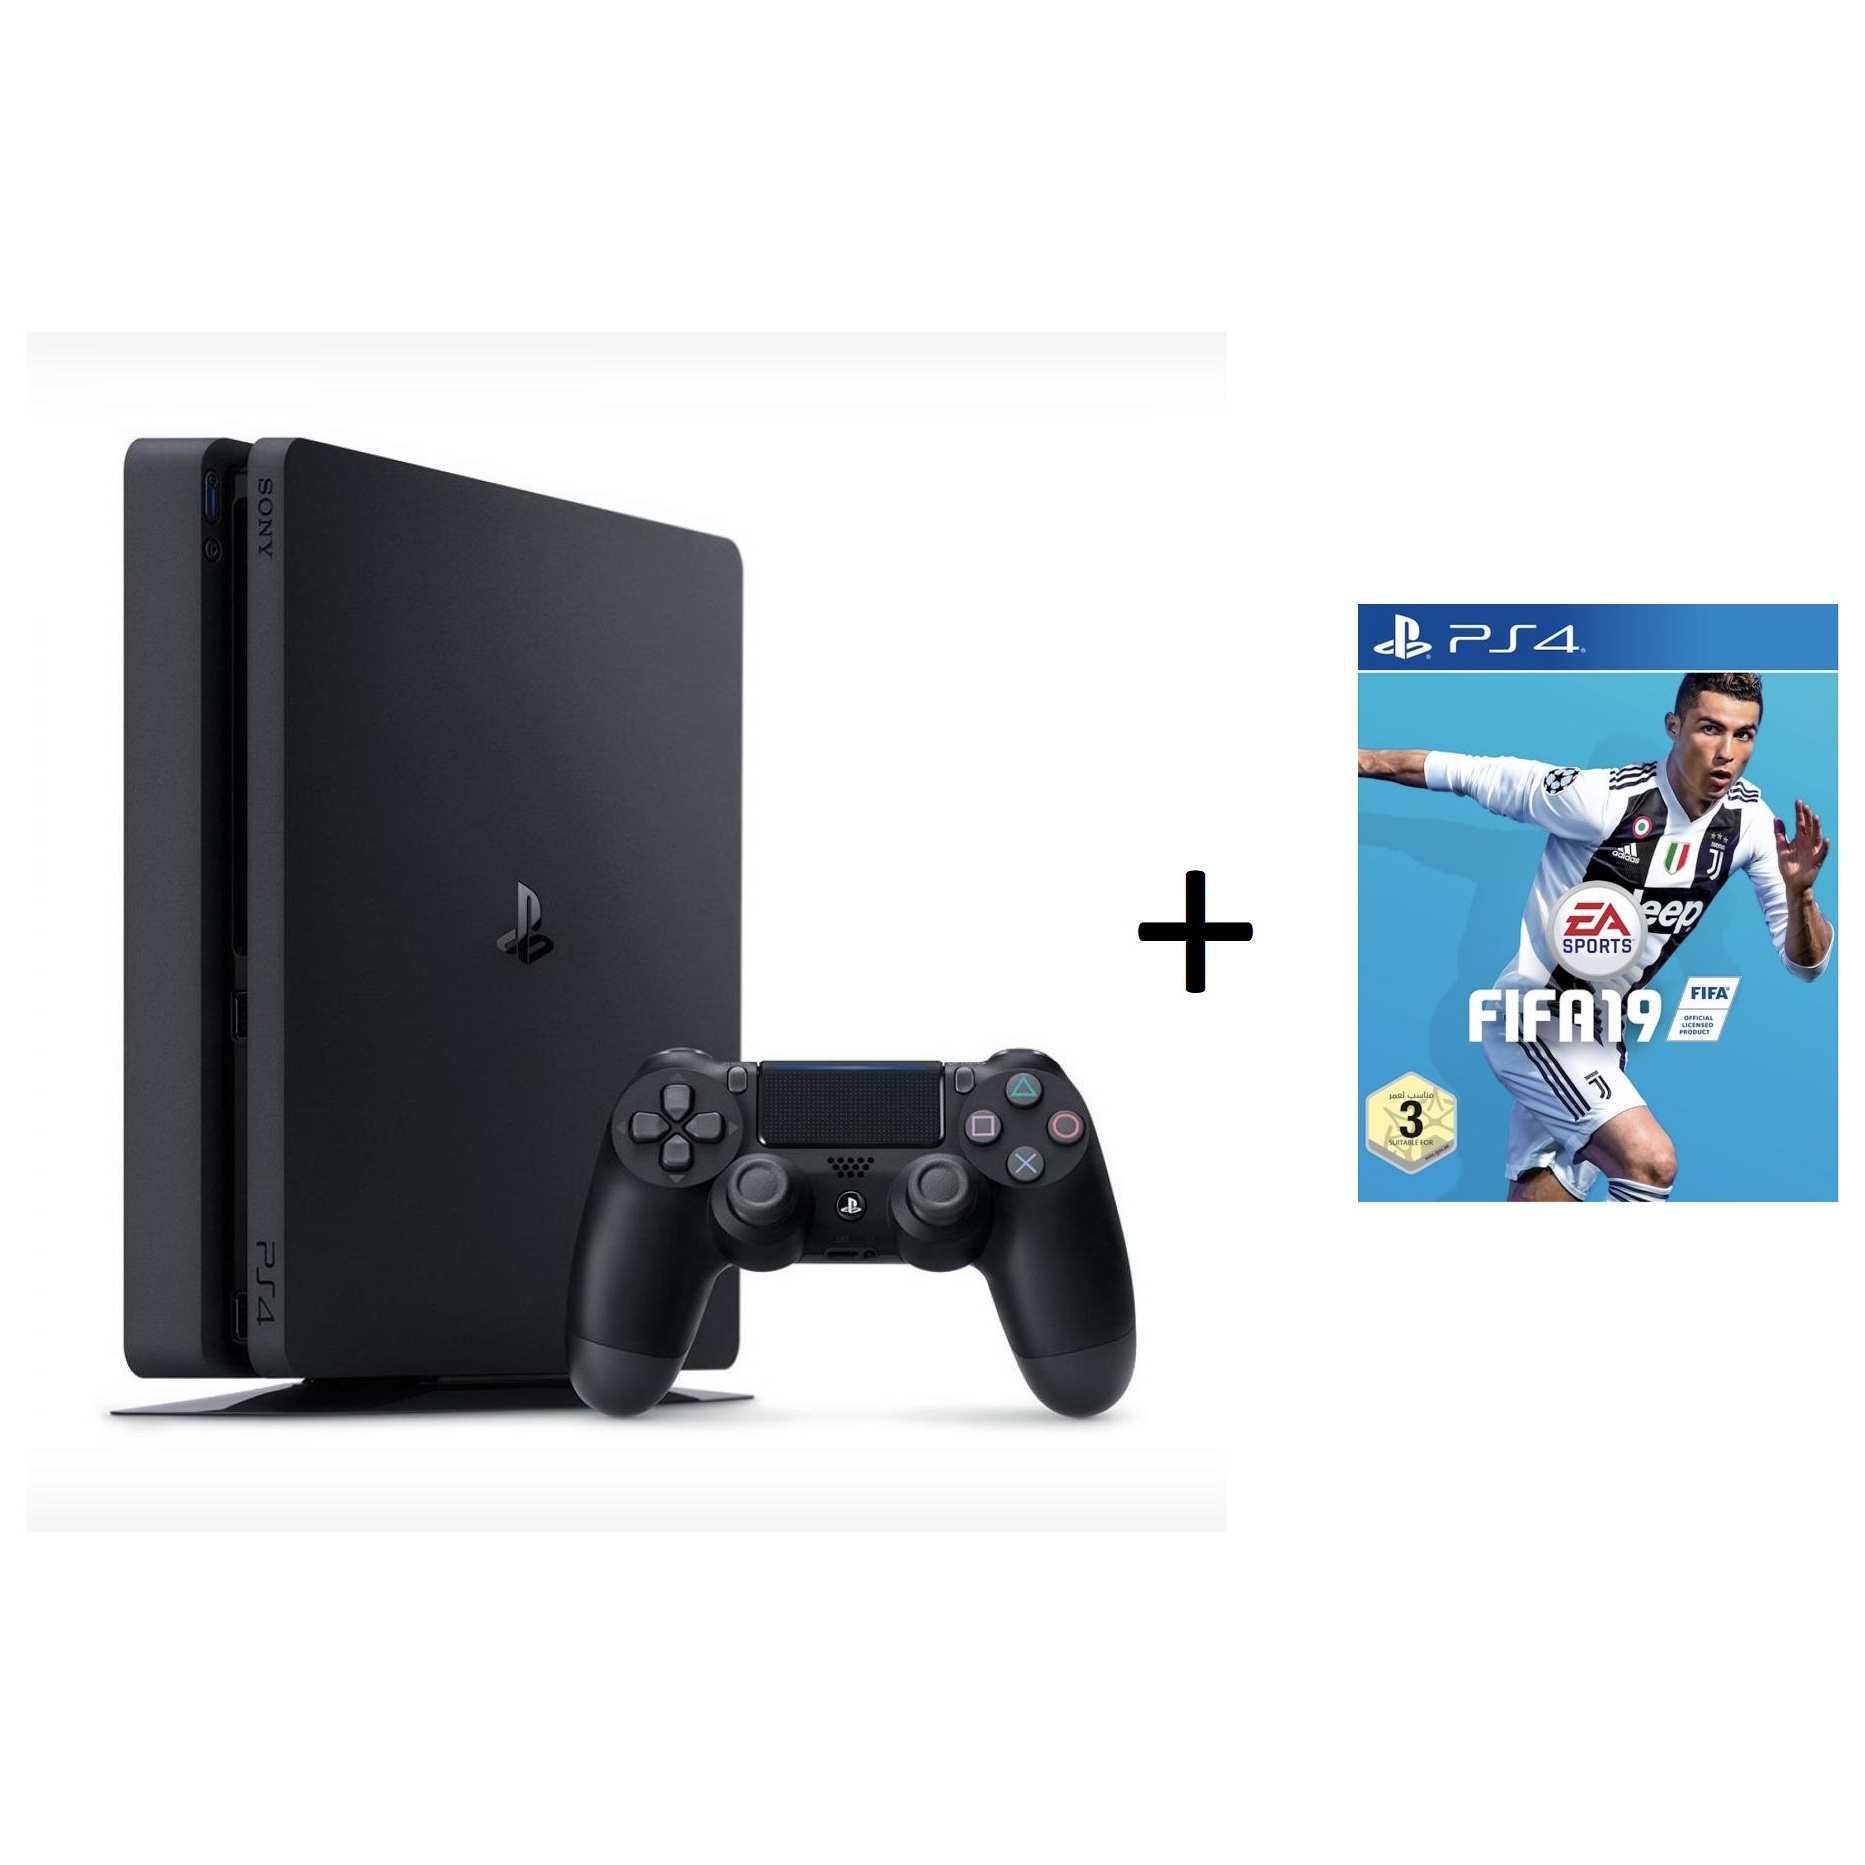 Buy online Best price PS4 Slim Console 1TB + Fifa 19 Game (Arabic) + 2 Assorted Games in Egypt 2020 | Sharafdg.com